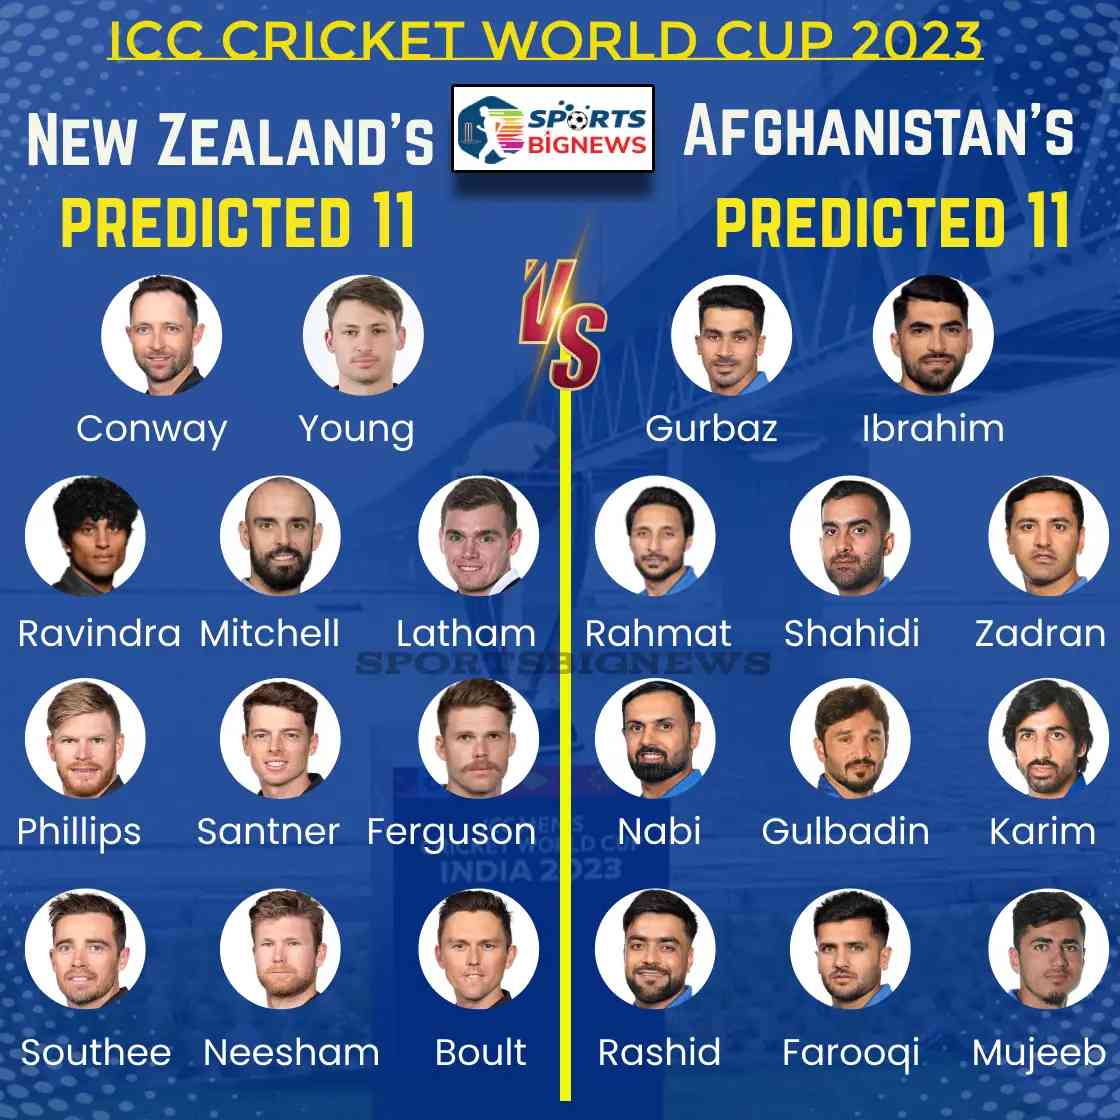 NZ vs AFG, Dream11, Playing 11 For Cricket World Cup 2023